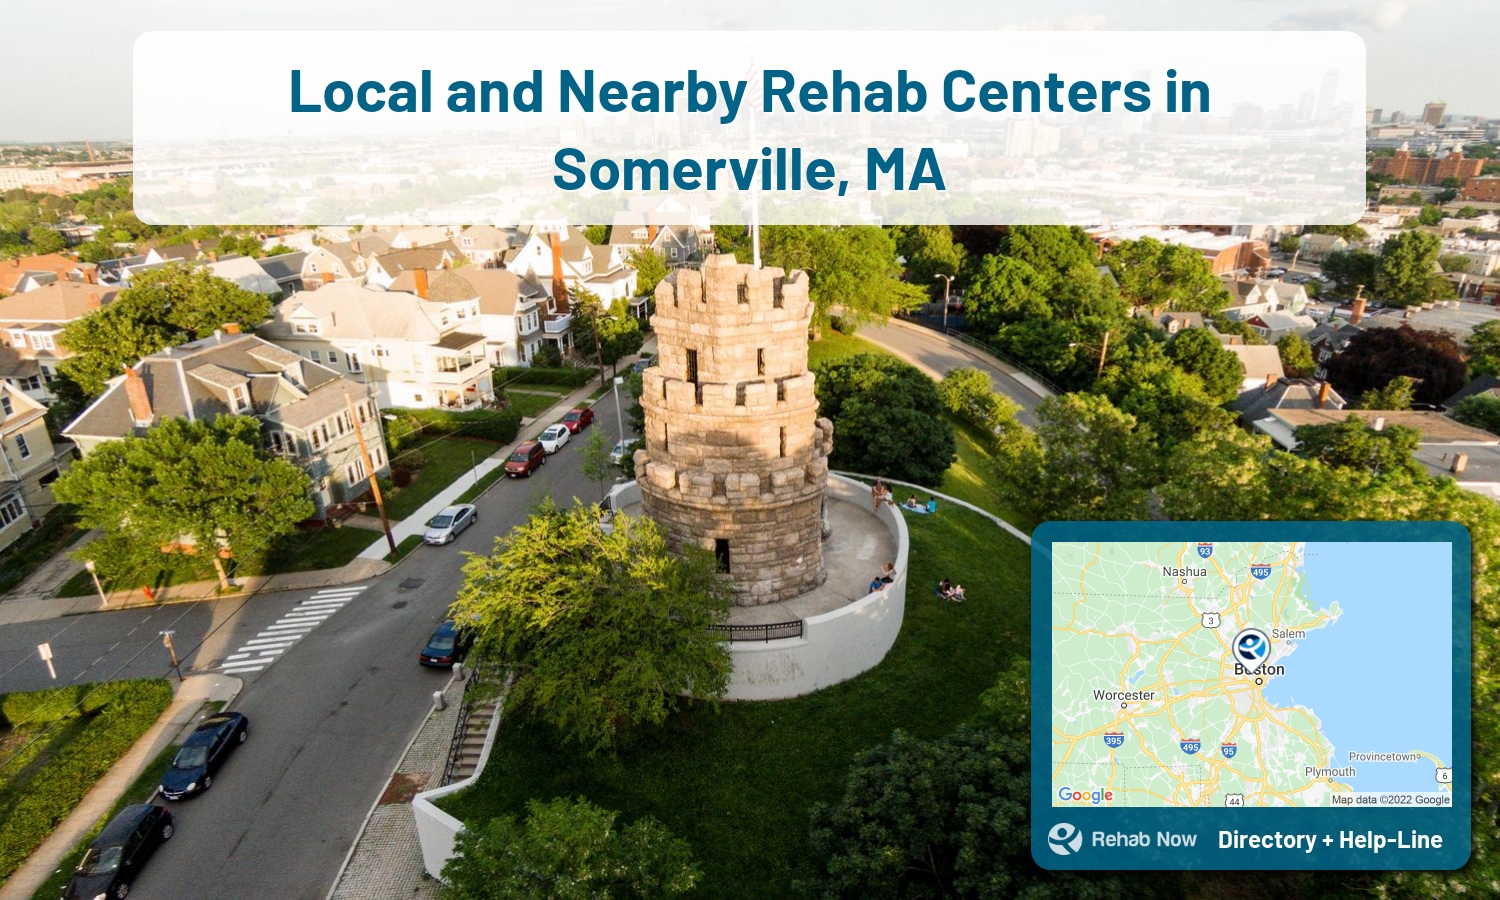 List of alcohol and drug treatment centers near you in Somerville, Massachusetts. Research certifications, programs, methods, pricing, and more.